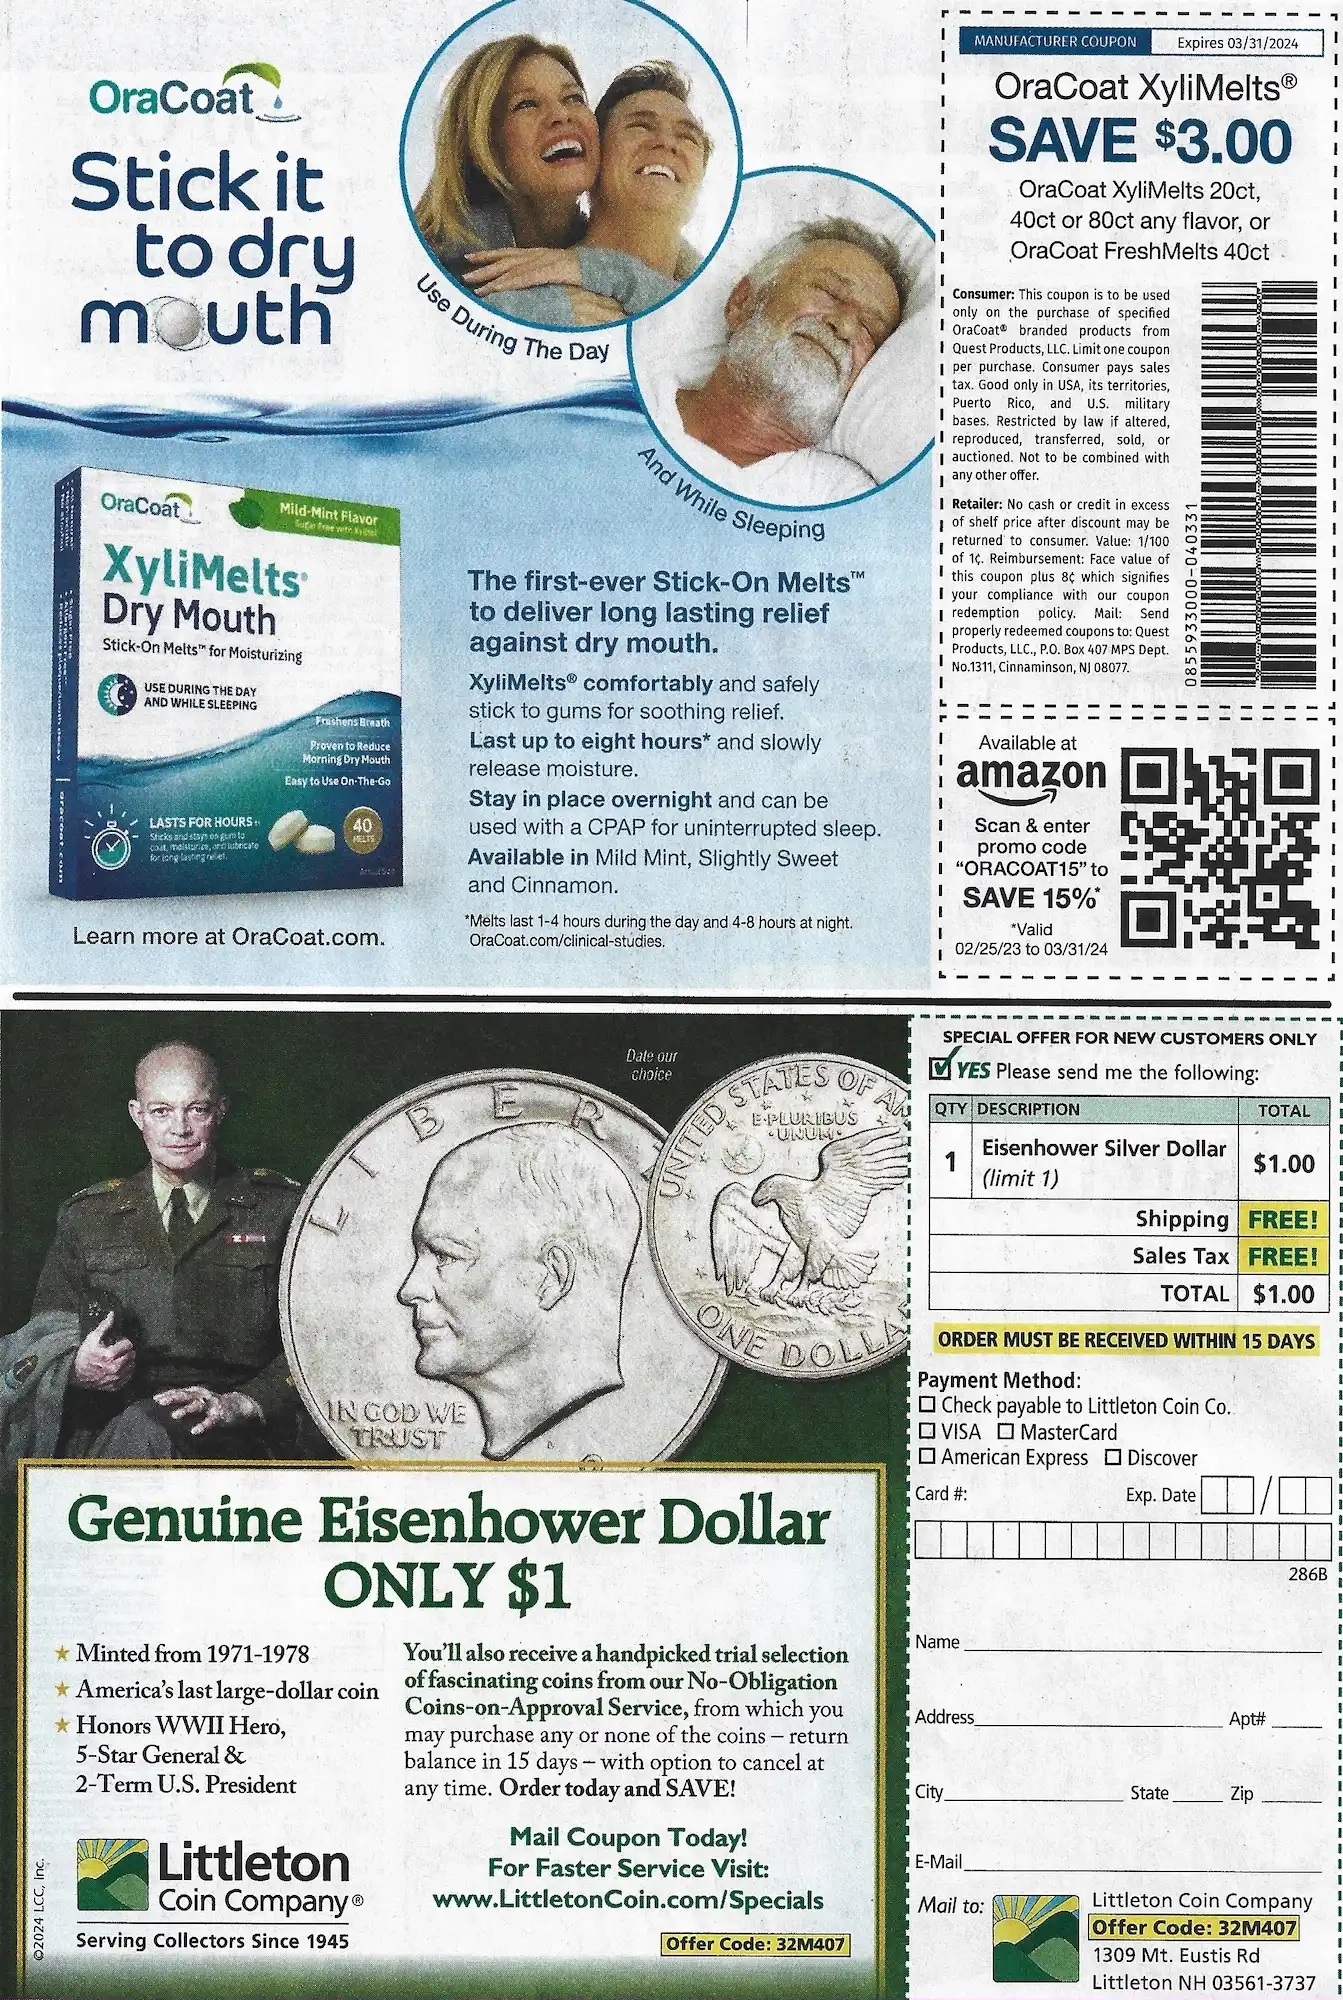 Save.Com Weekly Mailer Coupons - 02/24/2024 Oracoat Littleton Coin Company